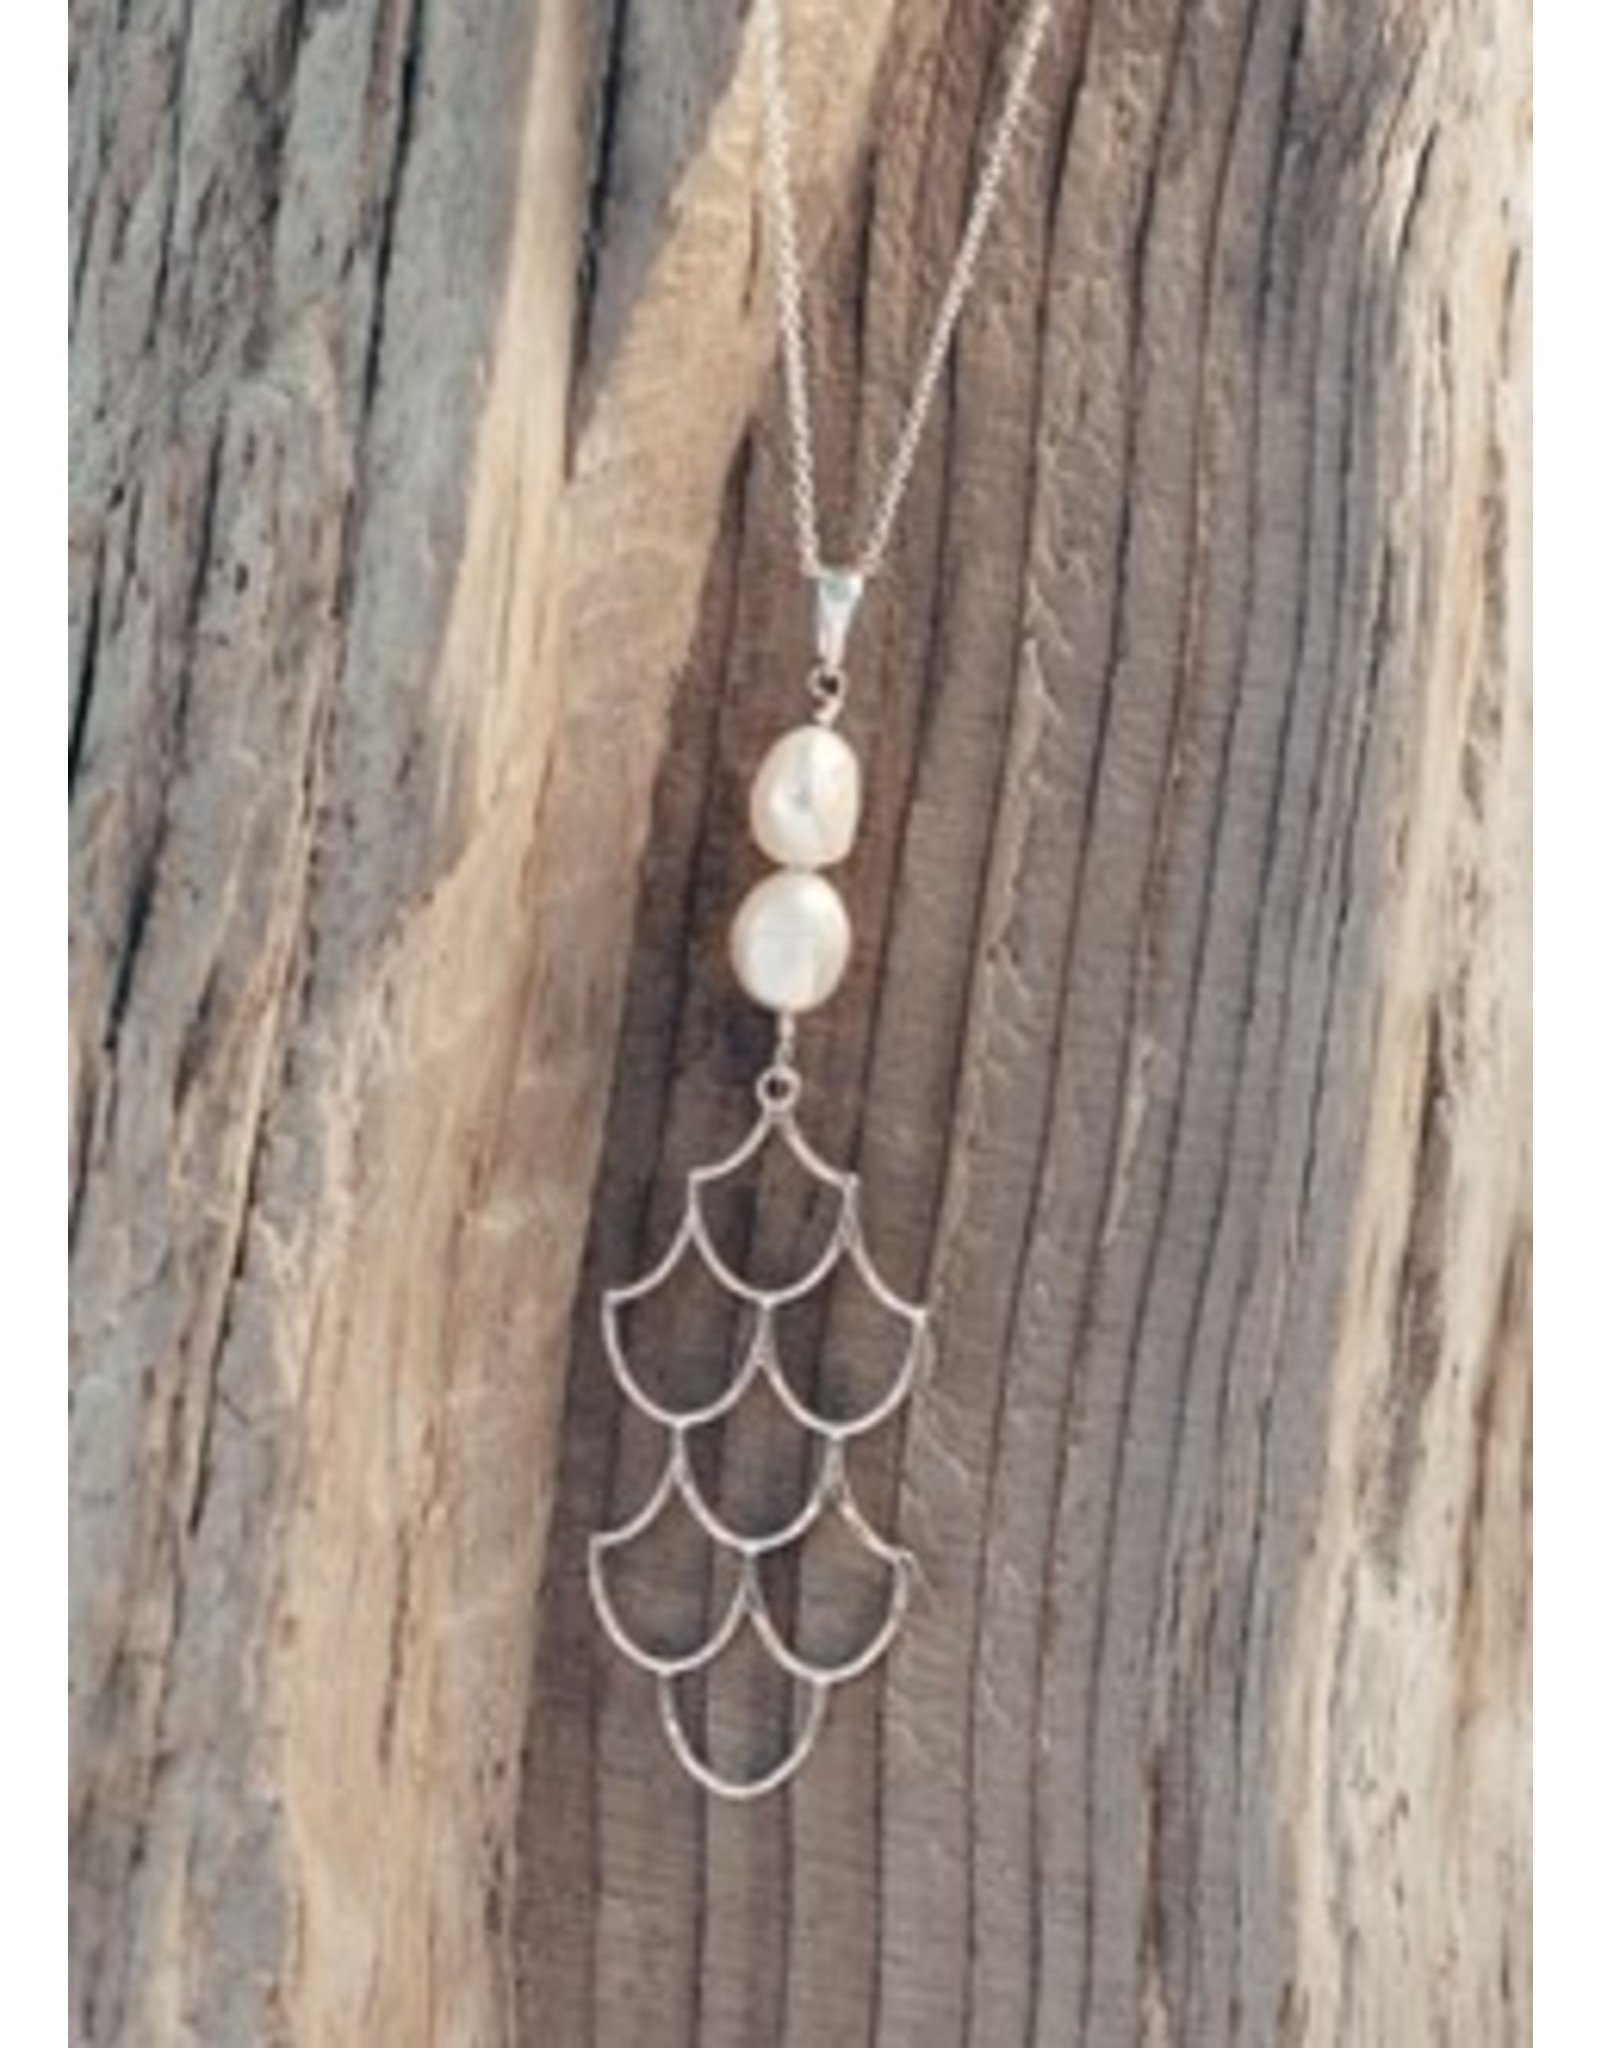 Glee jewelry Mermaid Necklace/Silver/White Pearl